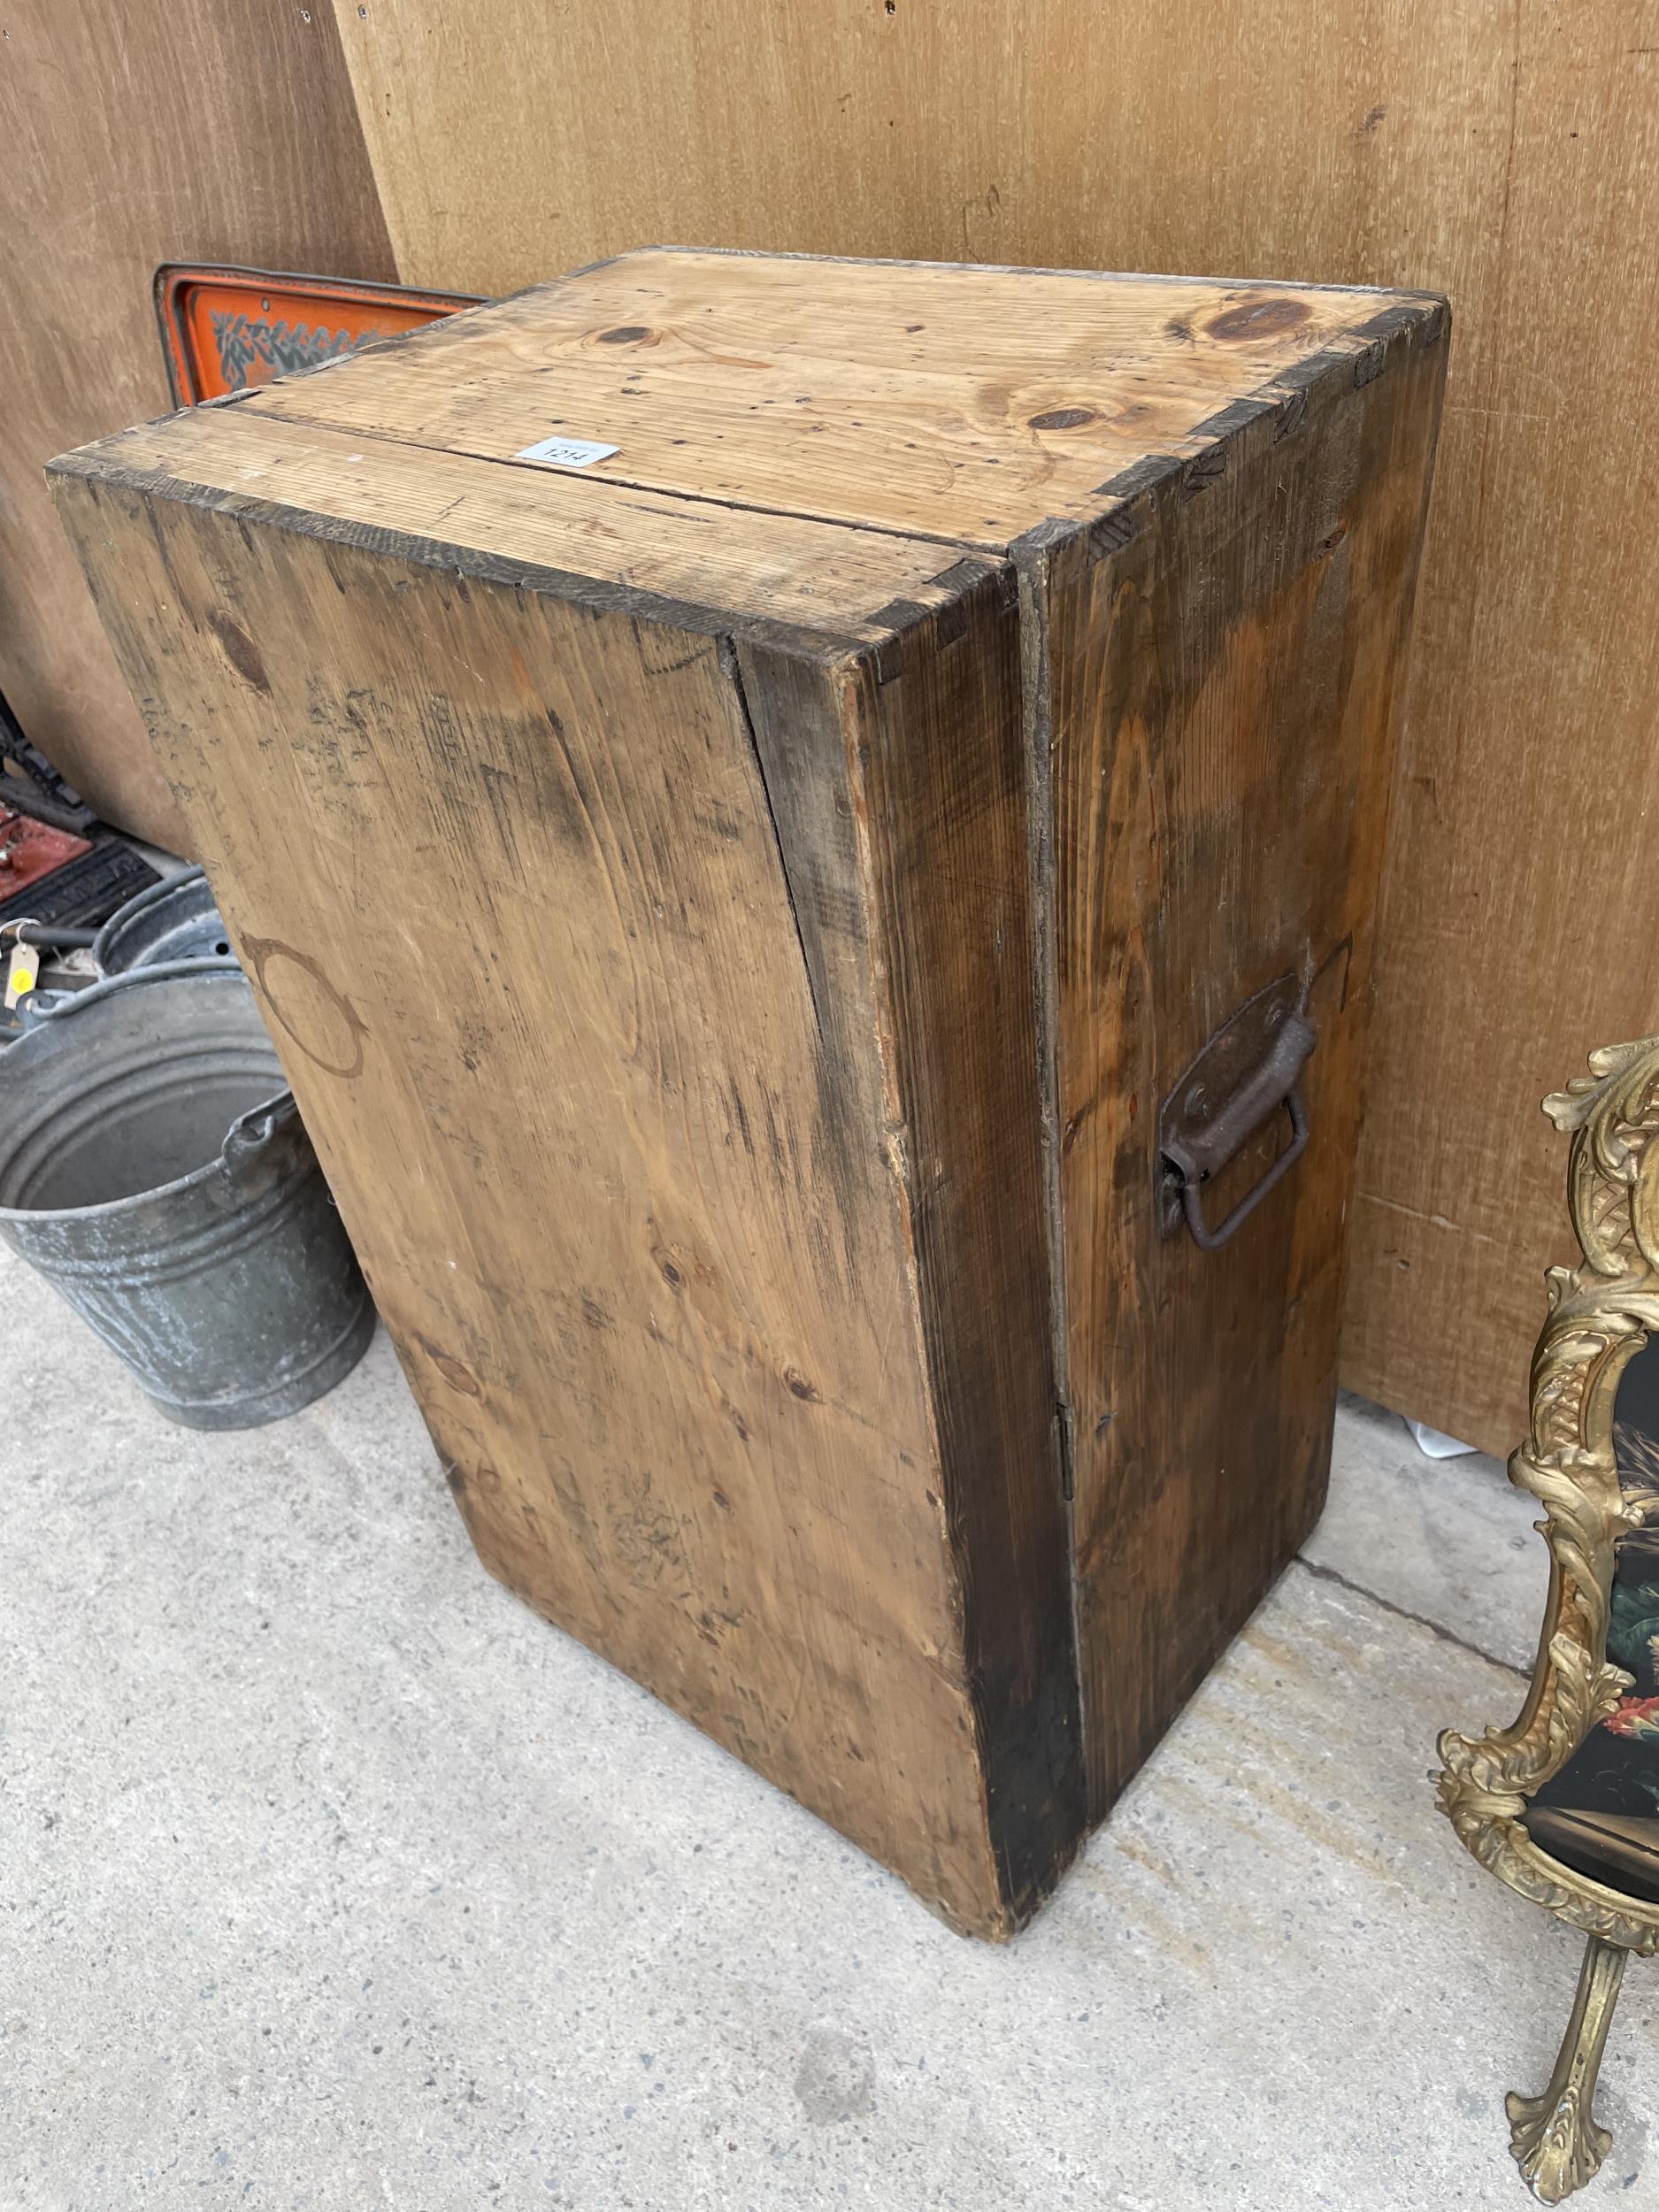 A VICTORIAN PINE LARGE VINTAGE JOINER'S CHEST WITH VARIOUS TOOLS SUCH AS G-CLAMP , VINTAGE SPIRIT - Image 5 of 6